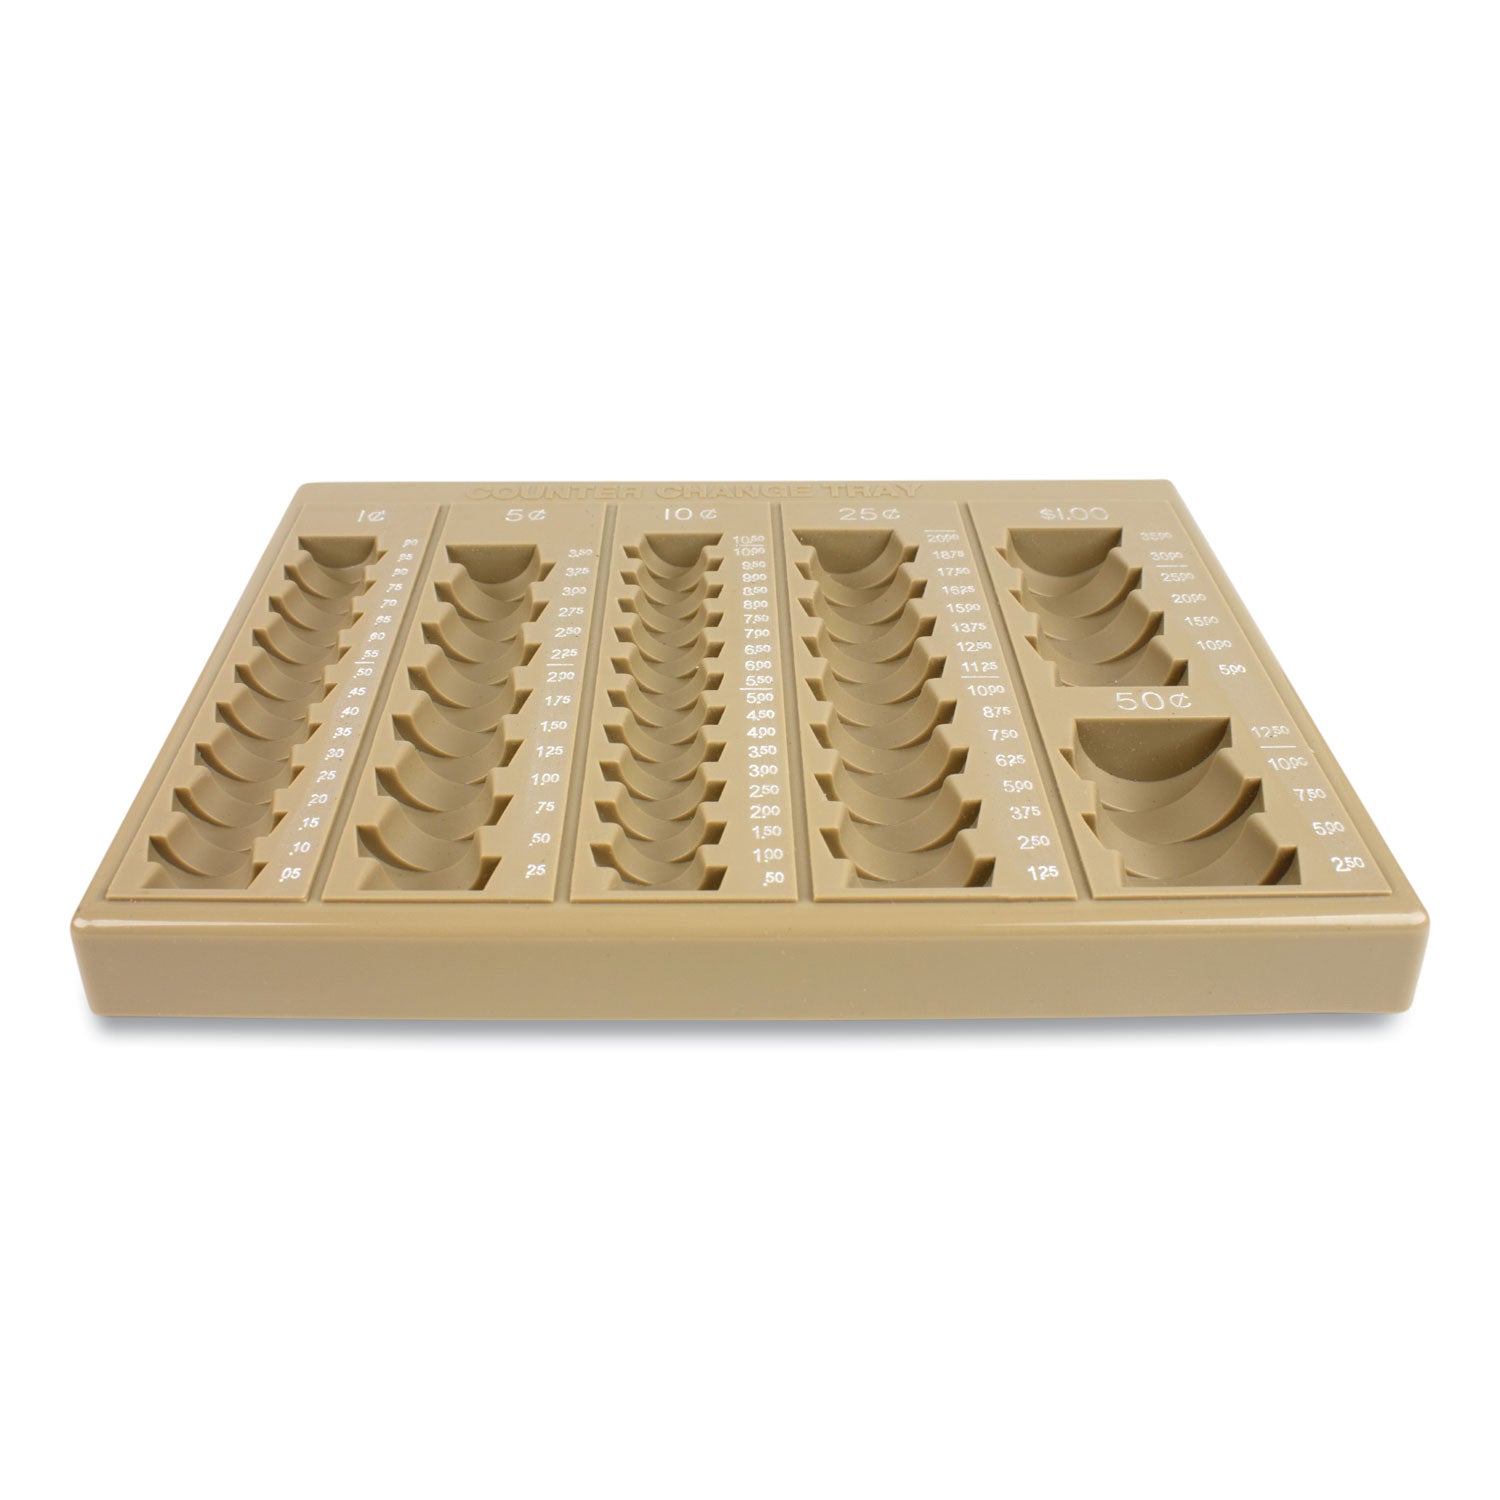 plastic-coin-tray-6-compartments-stackable-775-x-10-x-15-tan_cnk500025 - 1